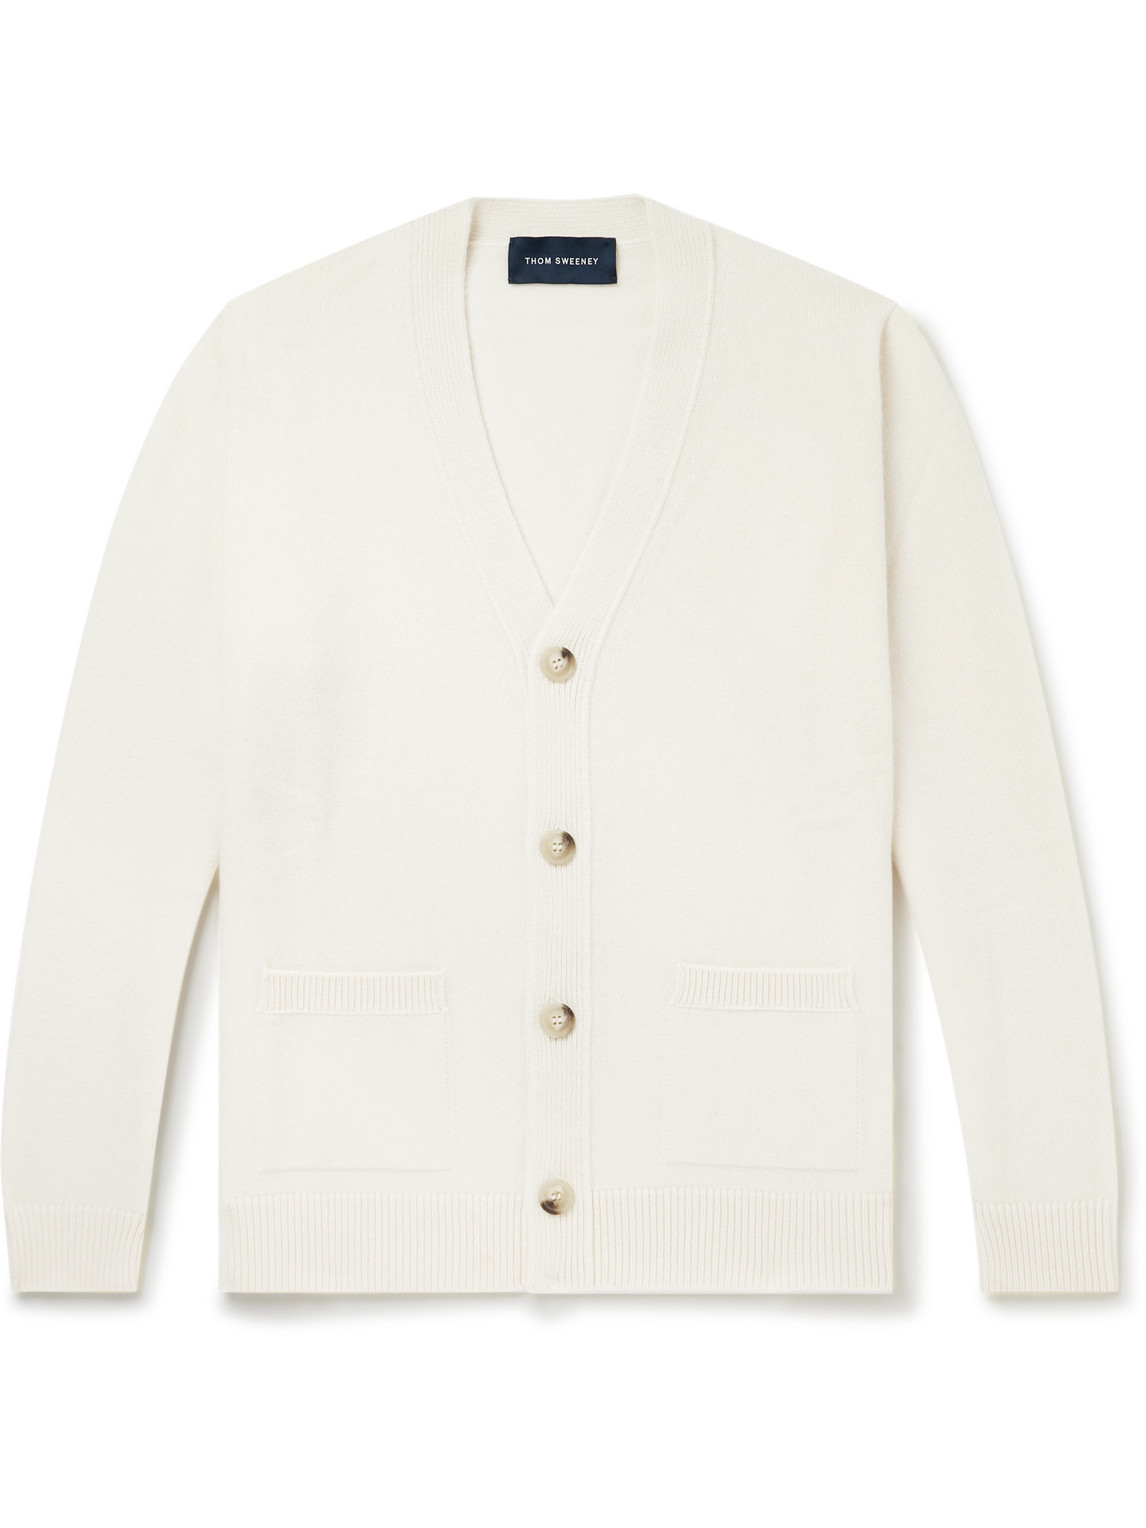 Thom Sweeney Wool And Cashmere-blend Cardigan In White